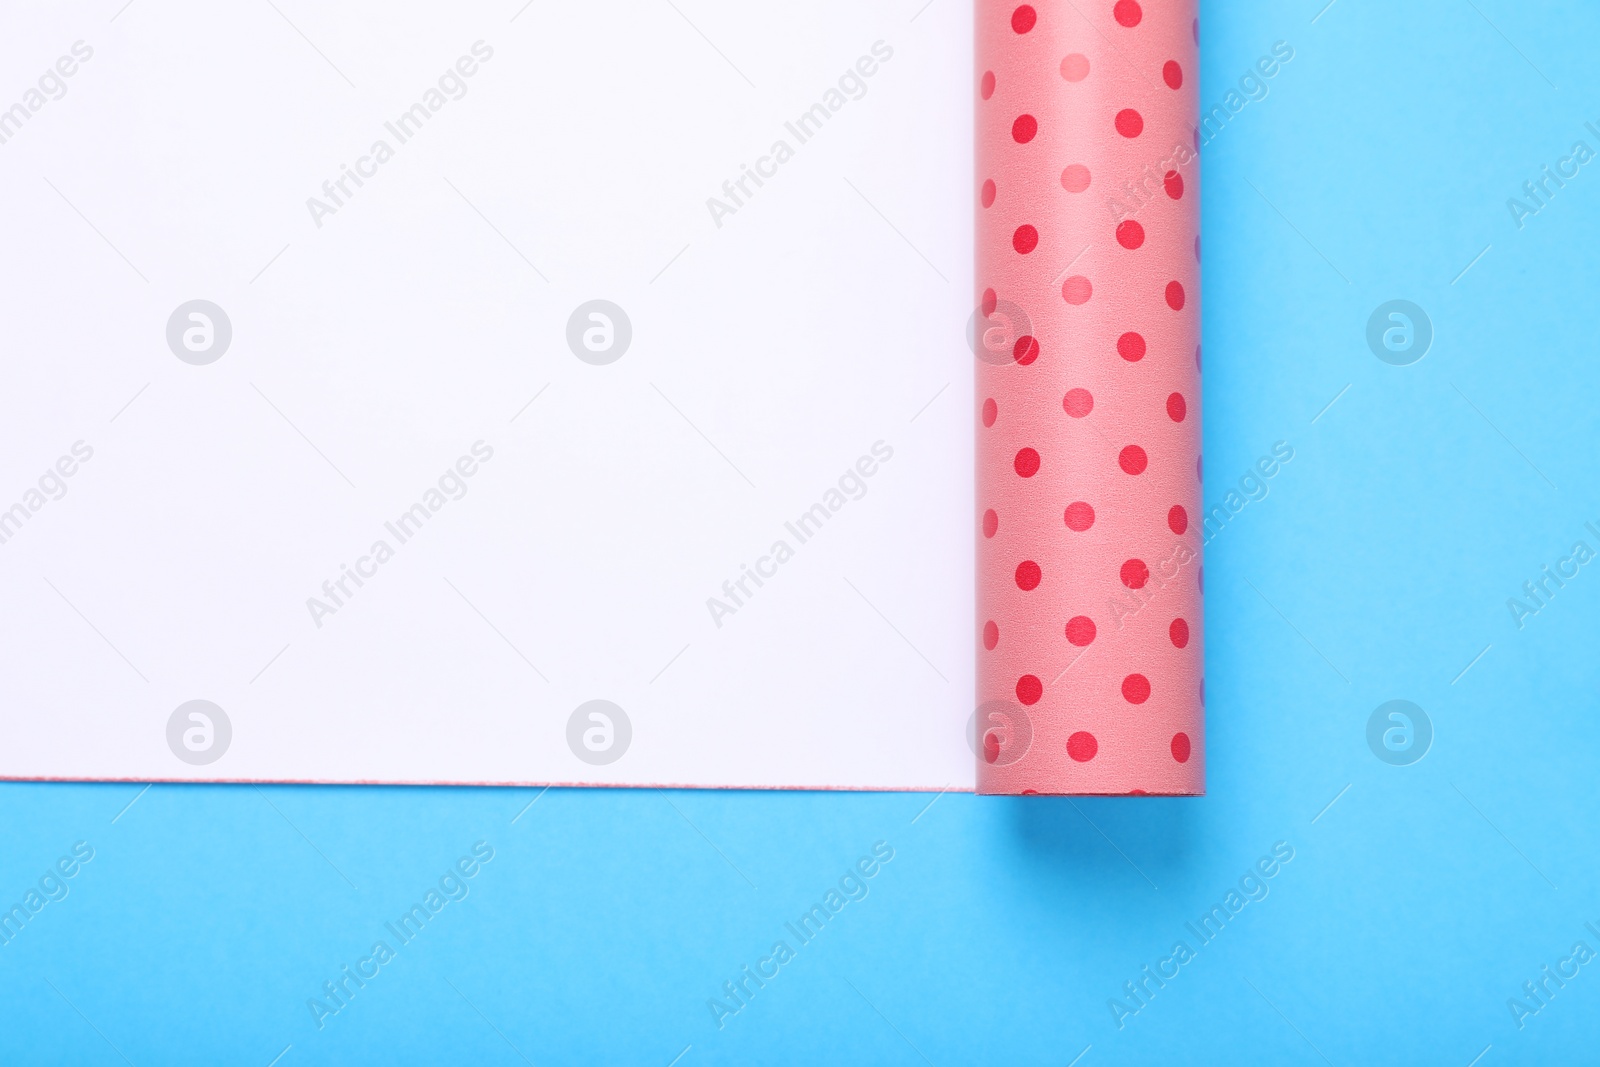 Photo of Roll of polka dot wrapping paper on light blue background, top view